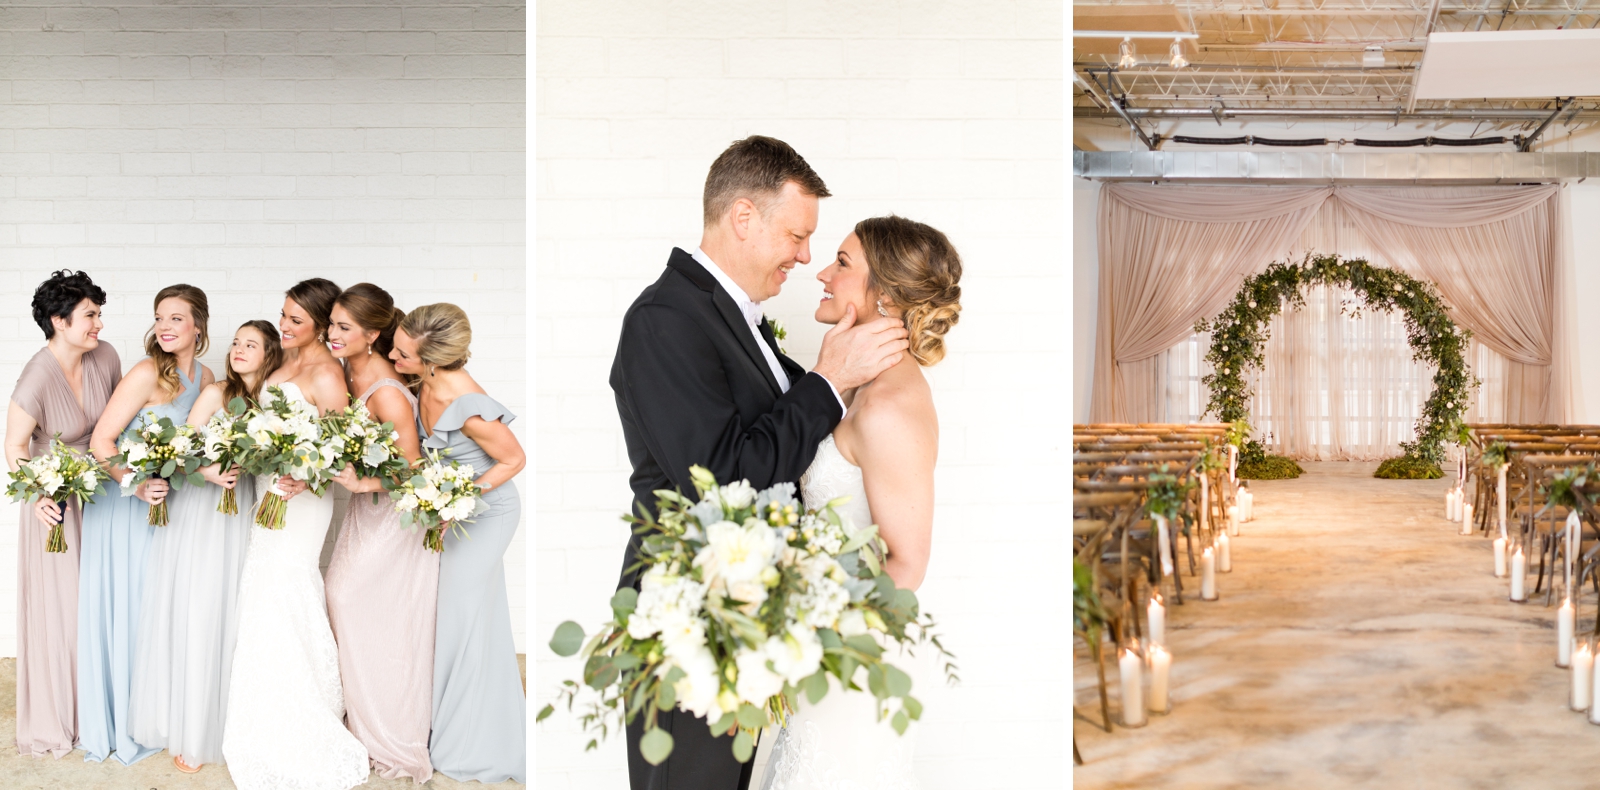 The Stave Room Wedding - Sydney Bruton Photography